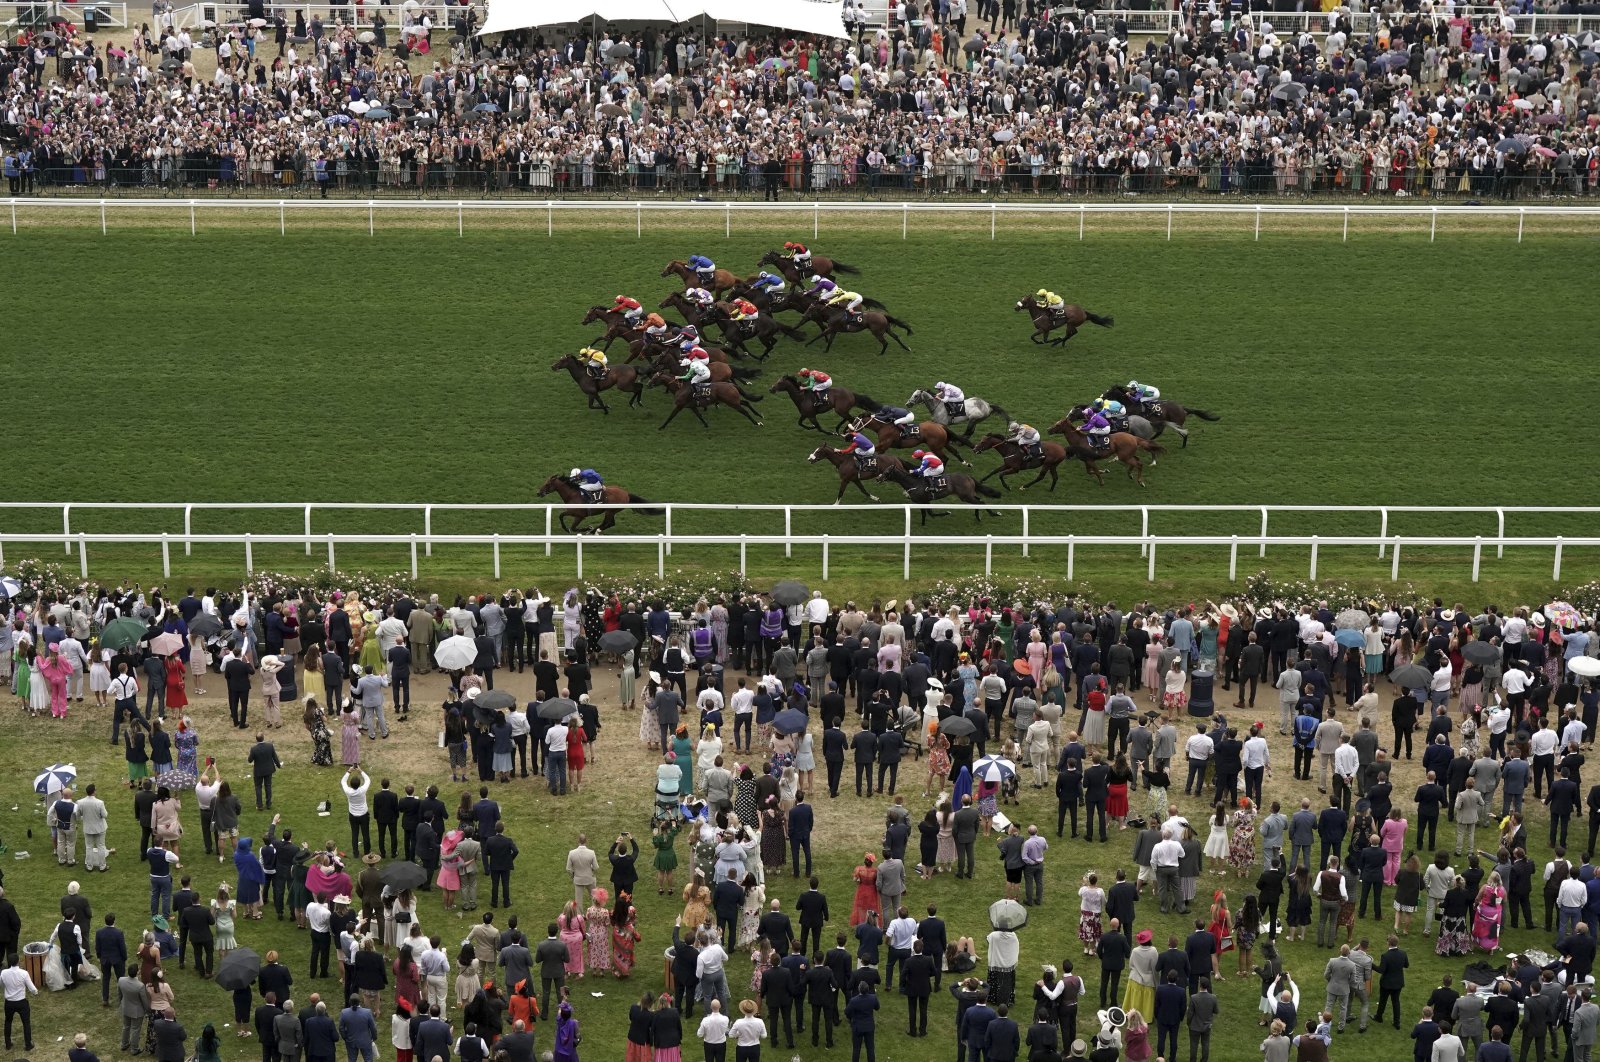 Naval Crown ridden by jockey James Doyle (bottom left) wins the Platinum Jubilee Stakes on the fifth day of the Royal Ascot horserace meeting, at Ascot Racecourse, in Ascot, England, June 18, 2022. (AP Photo)